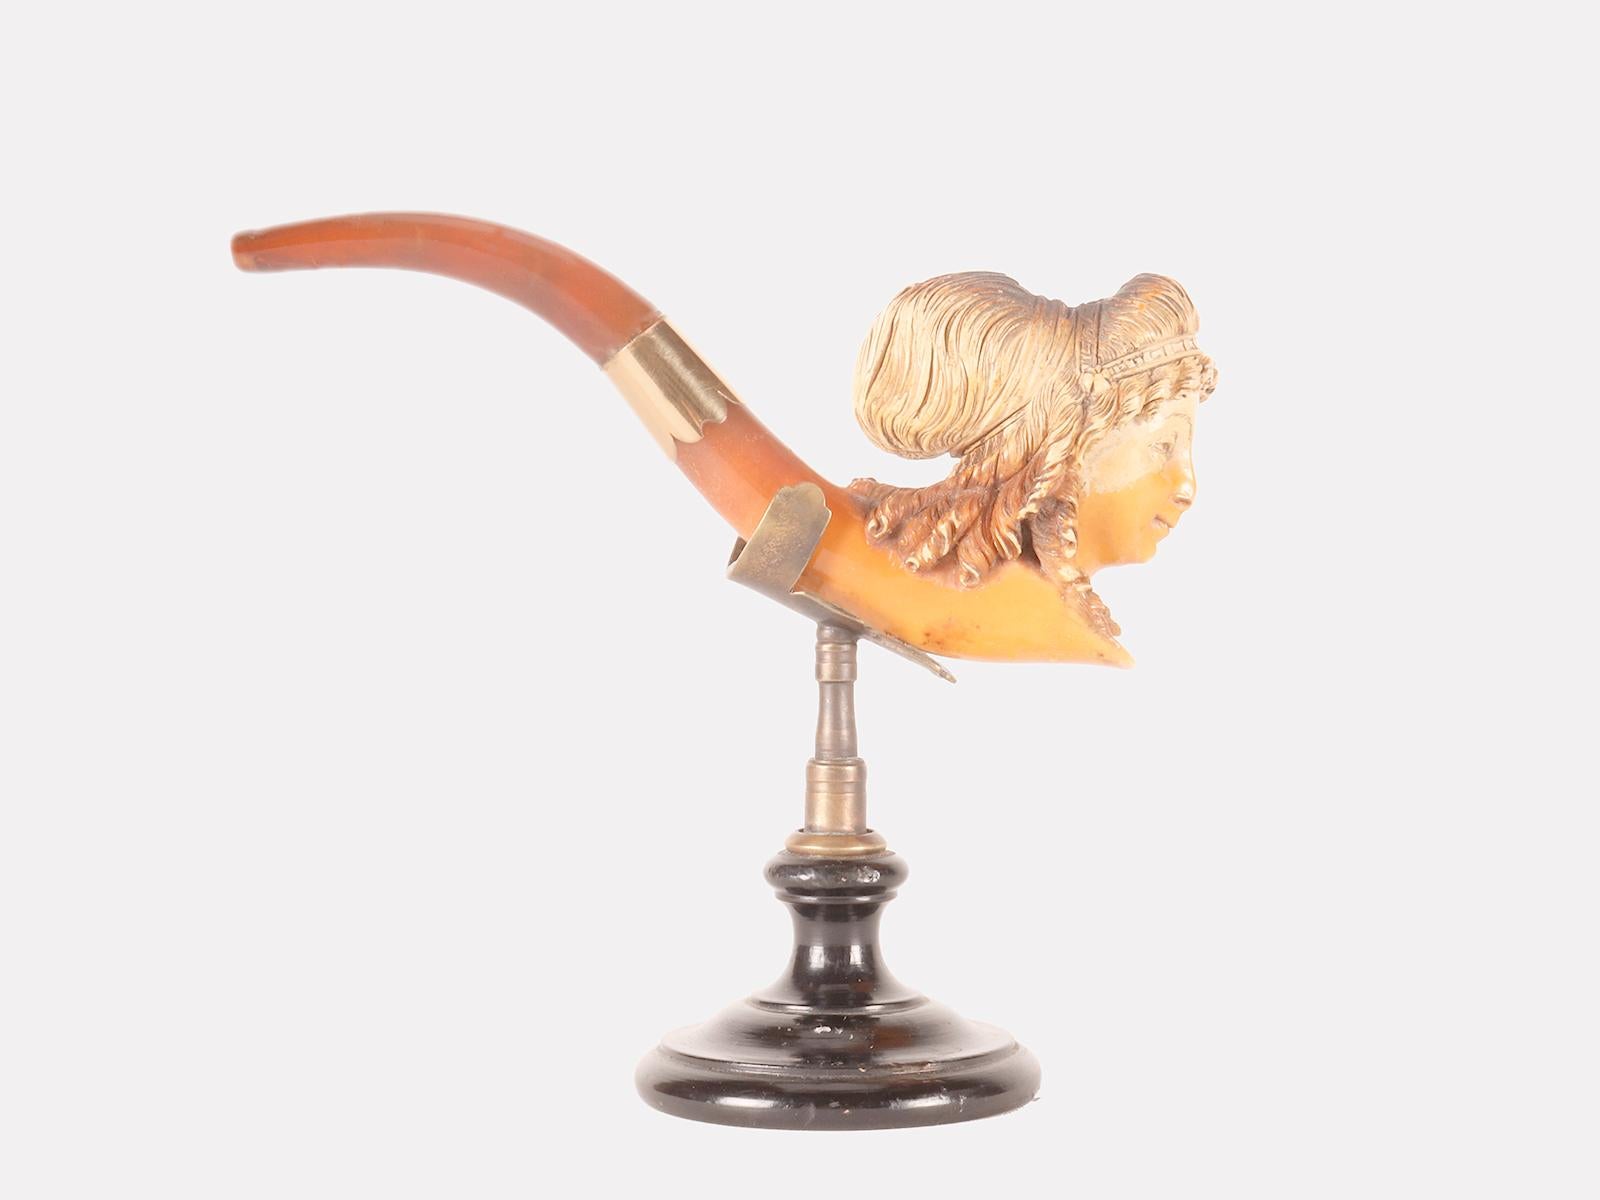 Carved meerschaum pipe, with amber mouthpiece and gold band. In the bowl of the pipe, a woman's head is depicted with hair gathered with a hairstyle of ribbons and flowers. Vienna, Austria circa 1890. (The stand base is for photographic use only,